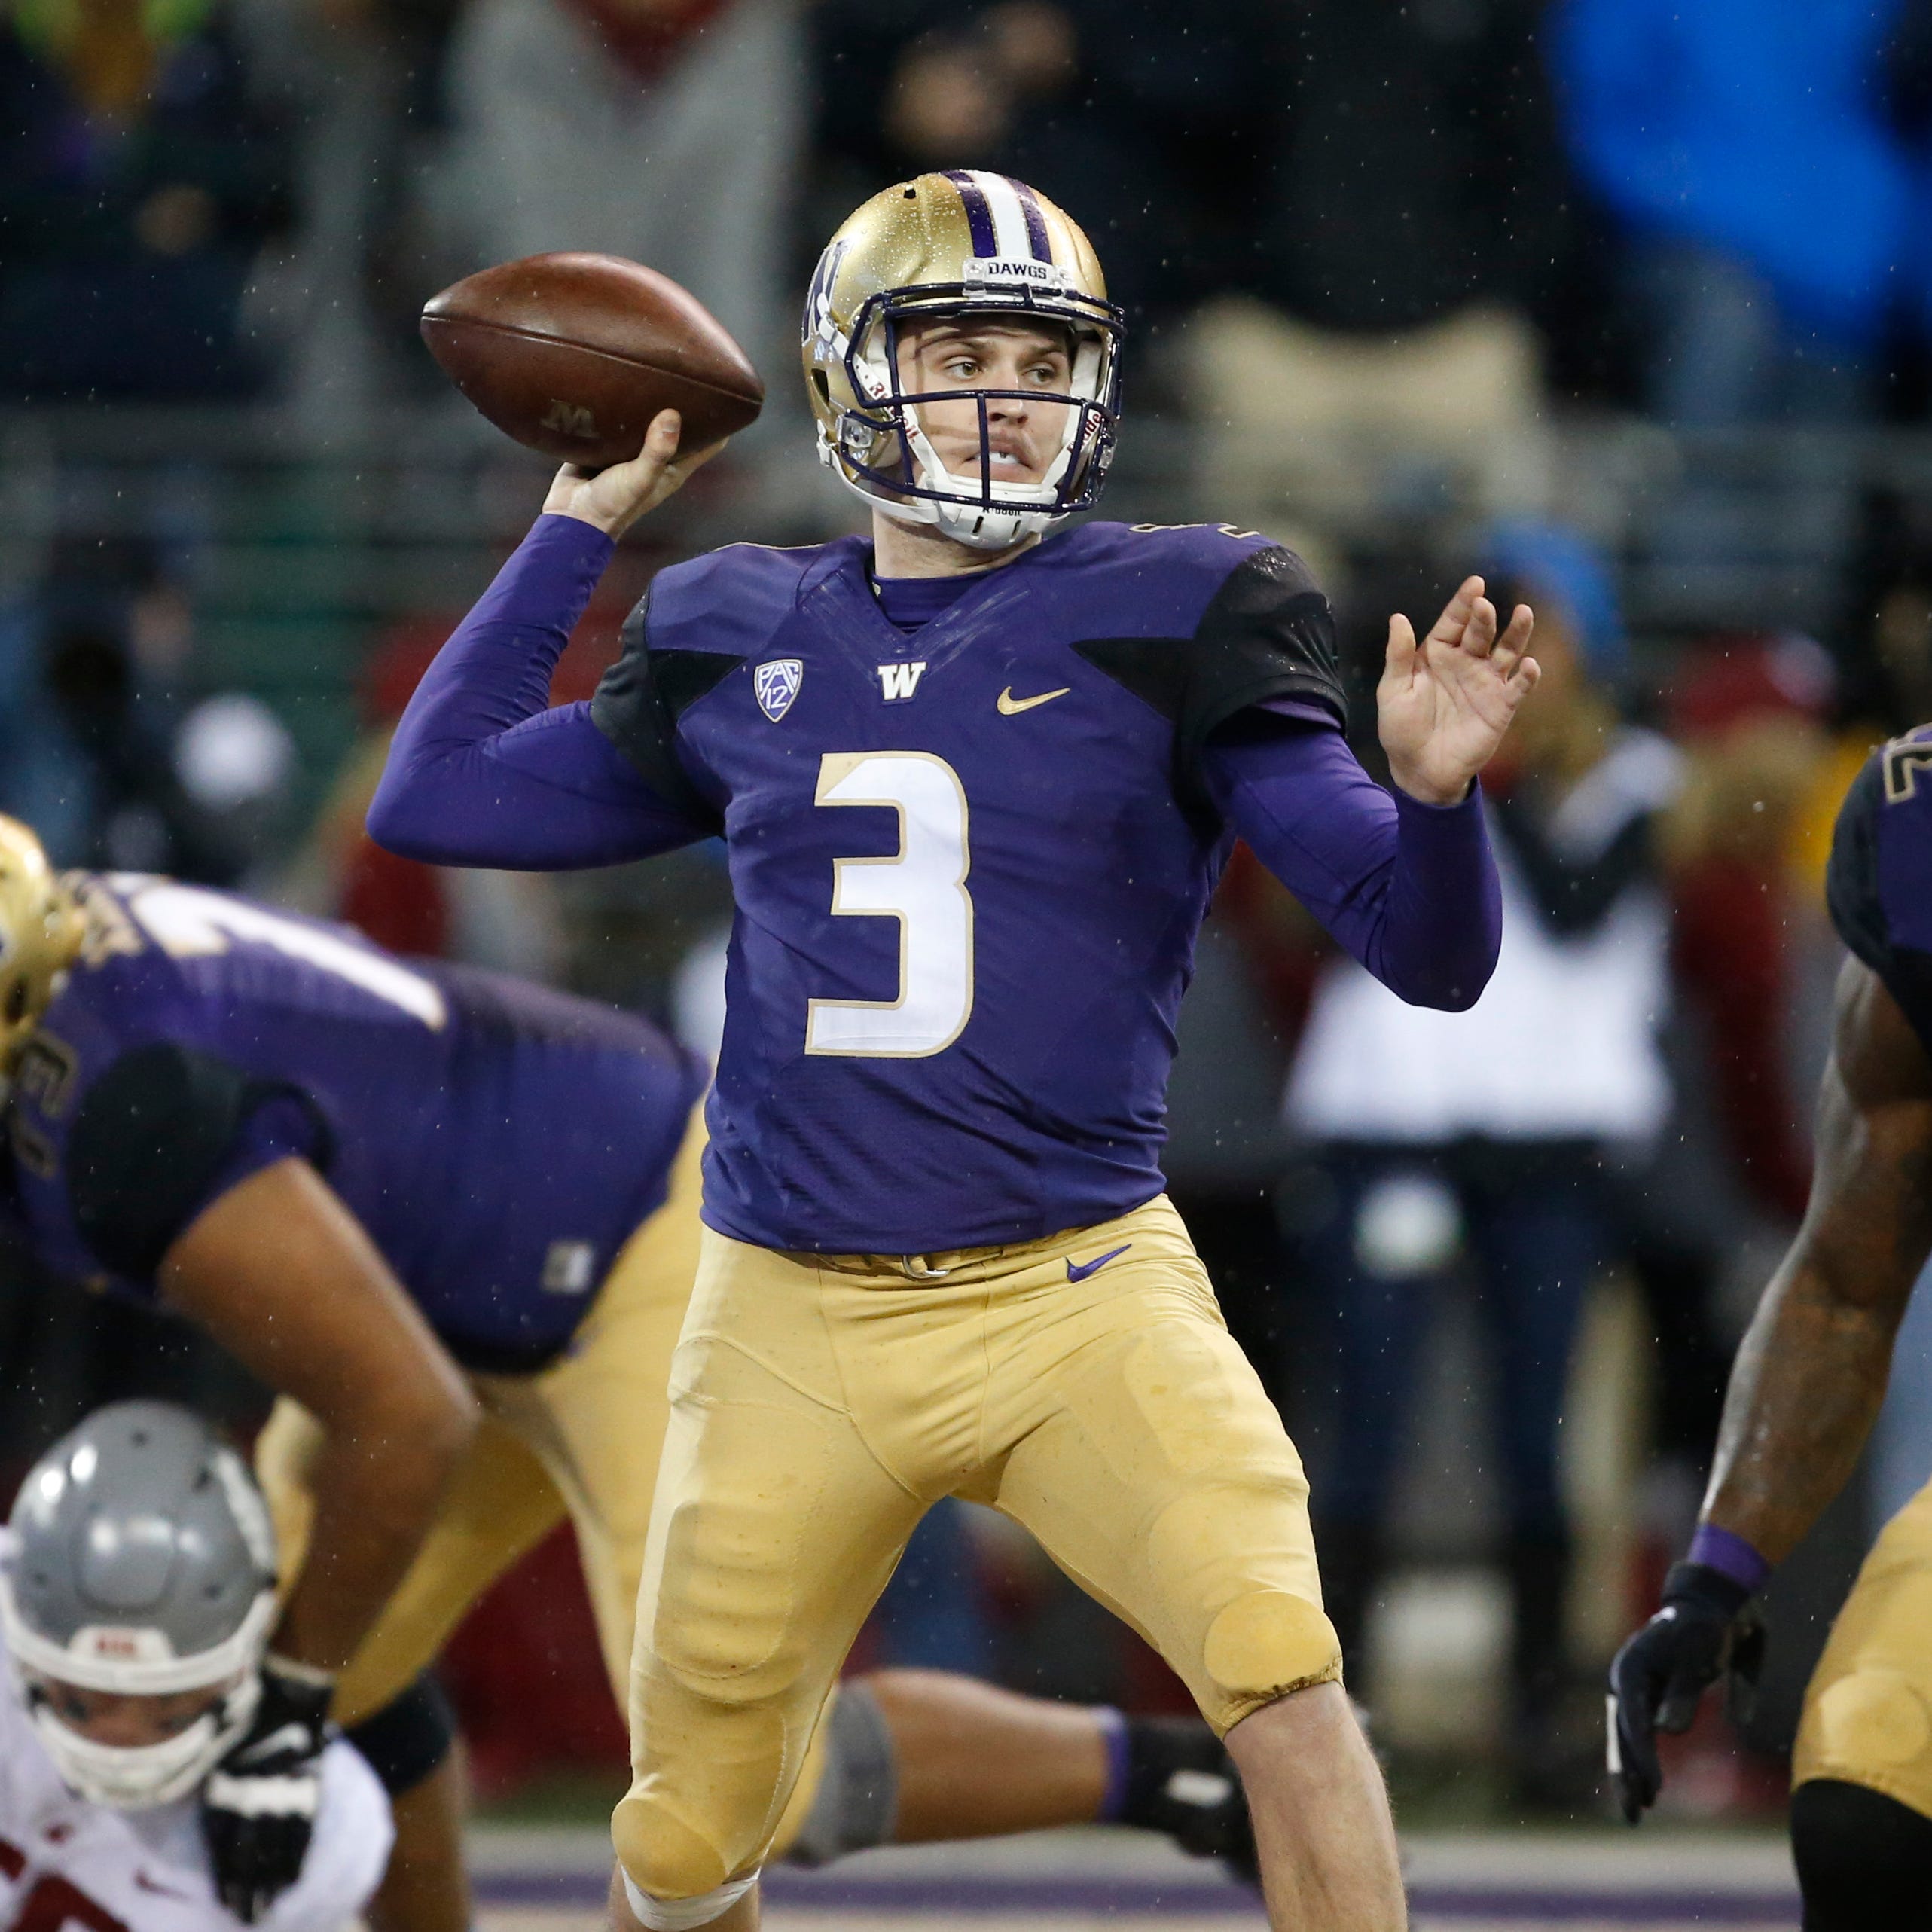 Washington quarterback Jake Browning will look to rebound and lead the Huskies back to the College Football Playoff in 2018.